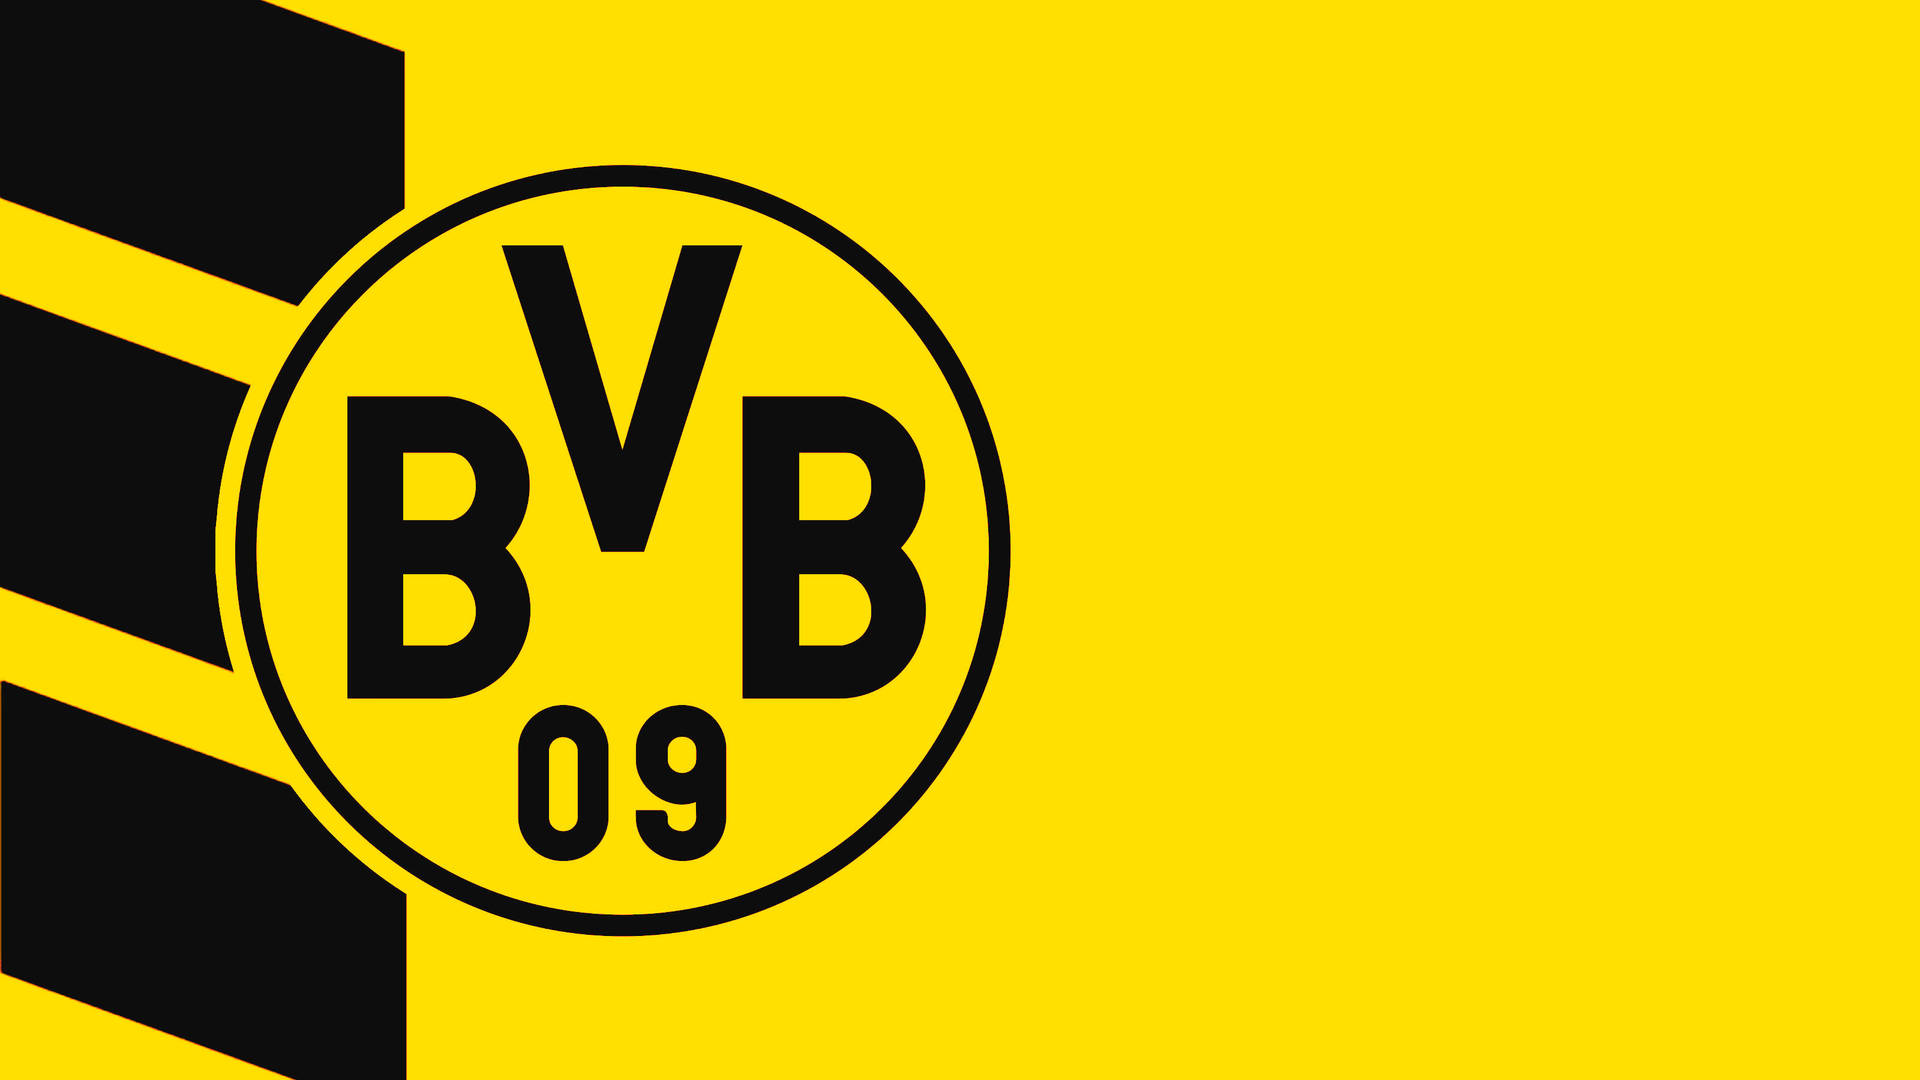 Top 999+ Borussia Dortmund Wallpapers Full HD, 4K✅Free to Use